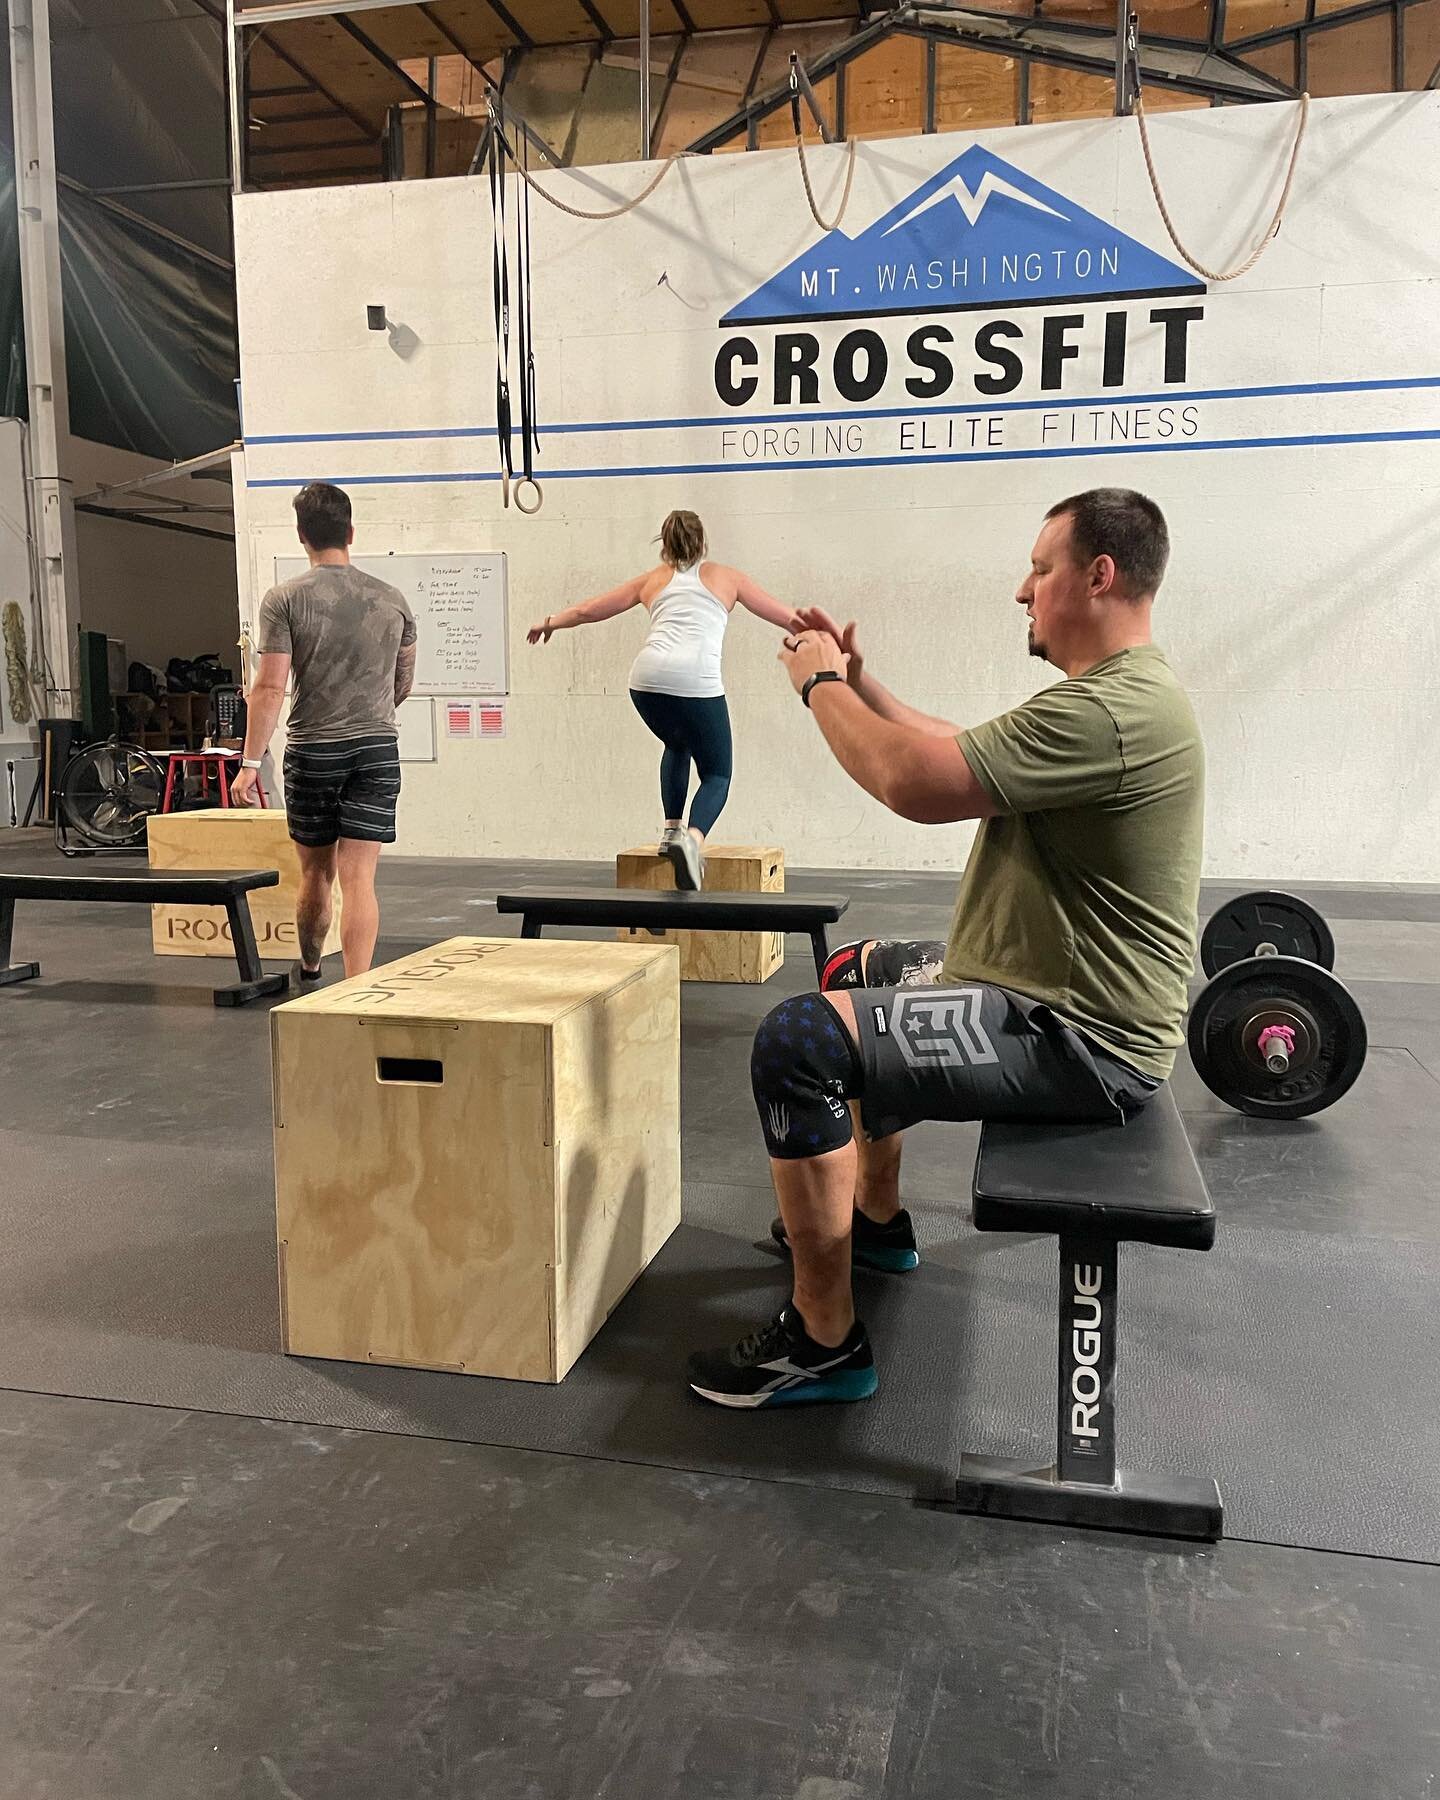 Nice little primer for the weekend today as we continue our Power Cycle and Murph prep. 

#crossfit #backsquat #boxjumps #functionalfitness #forgingelitefitness